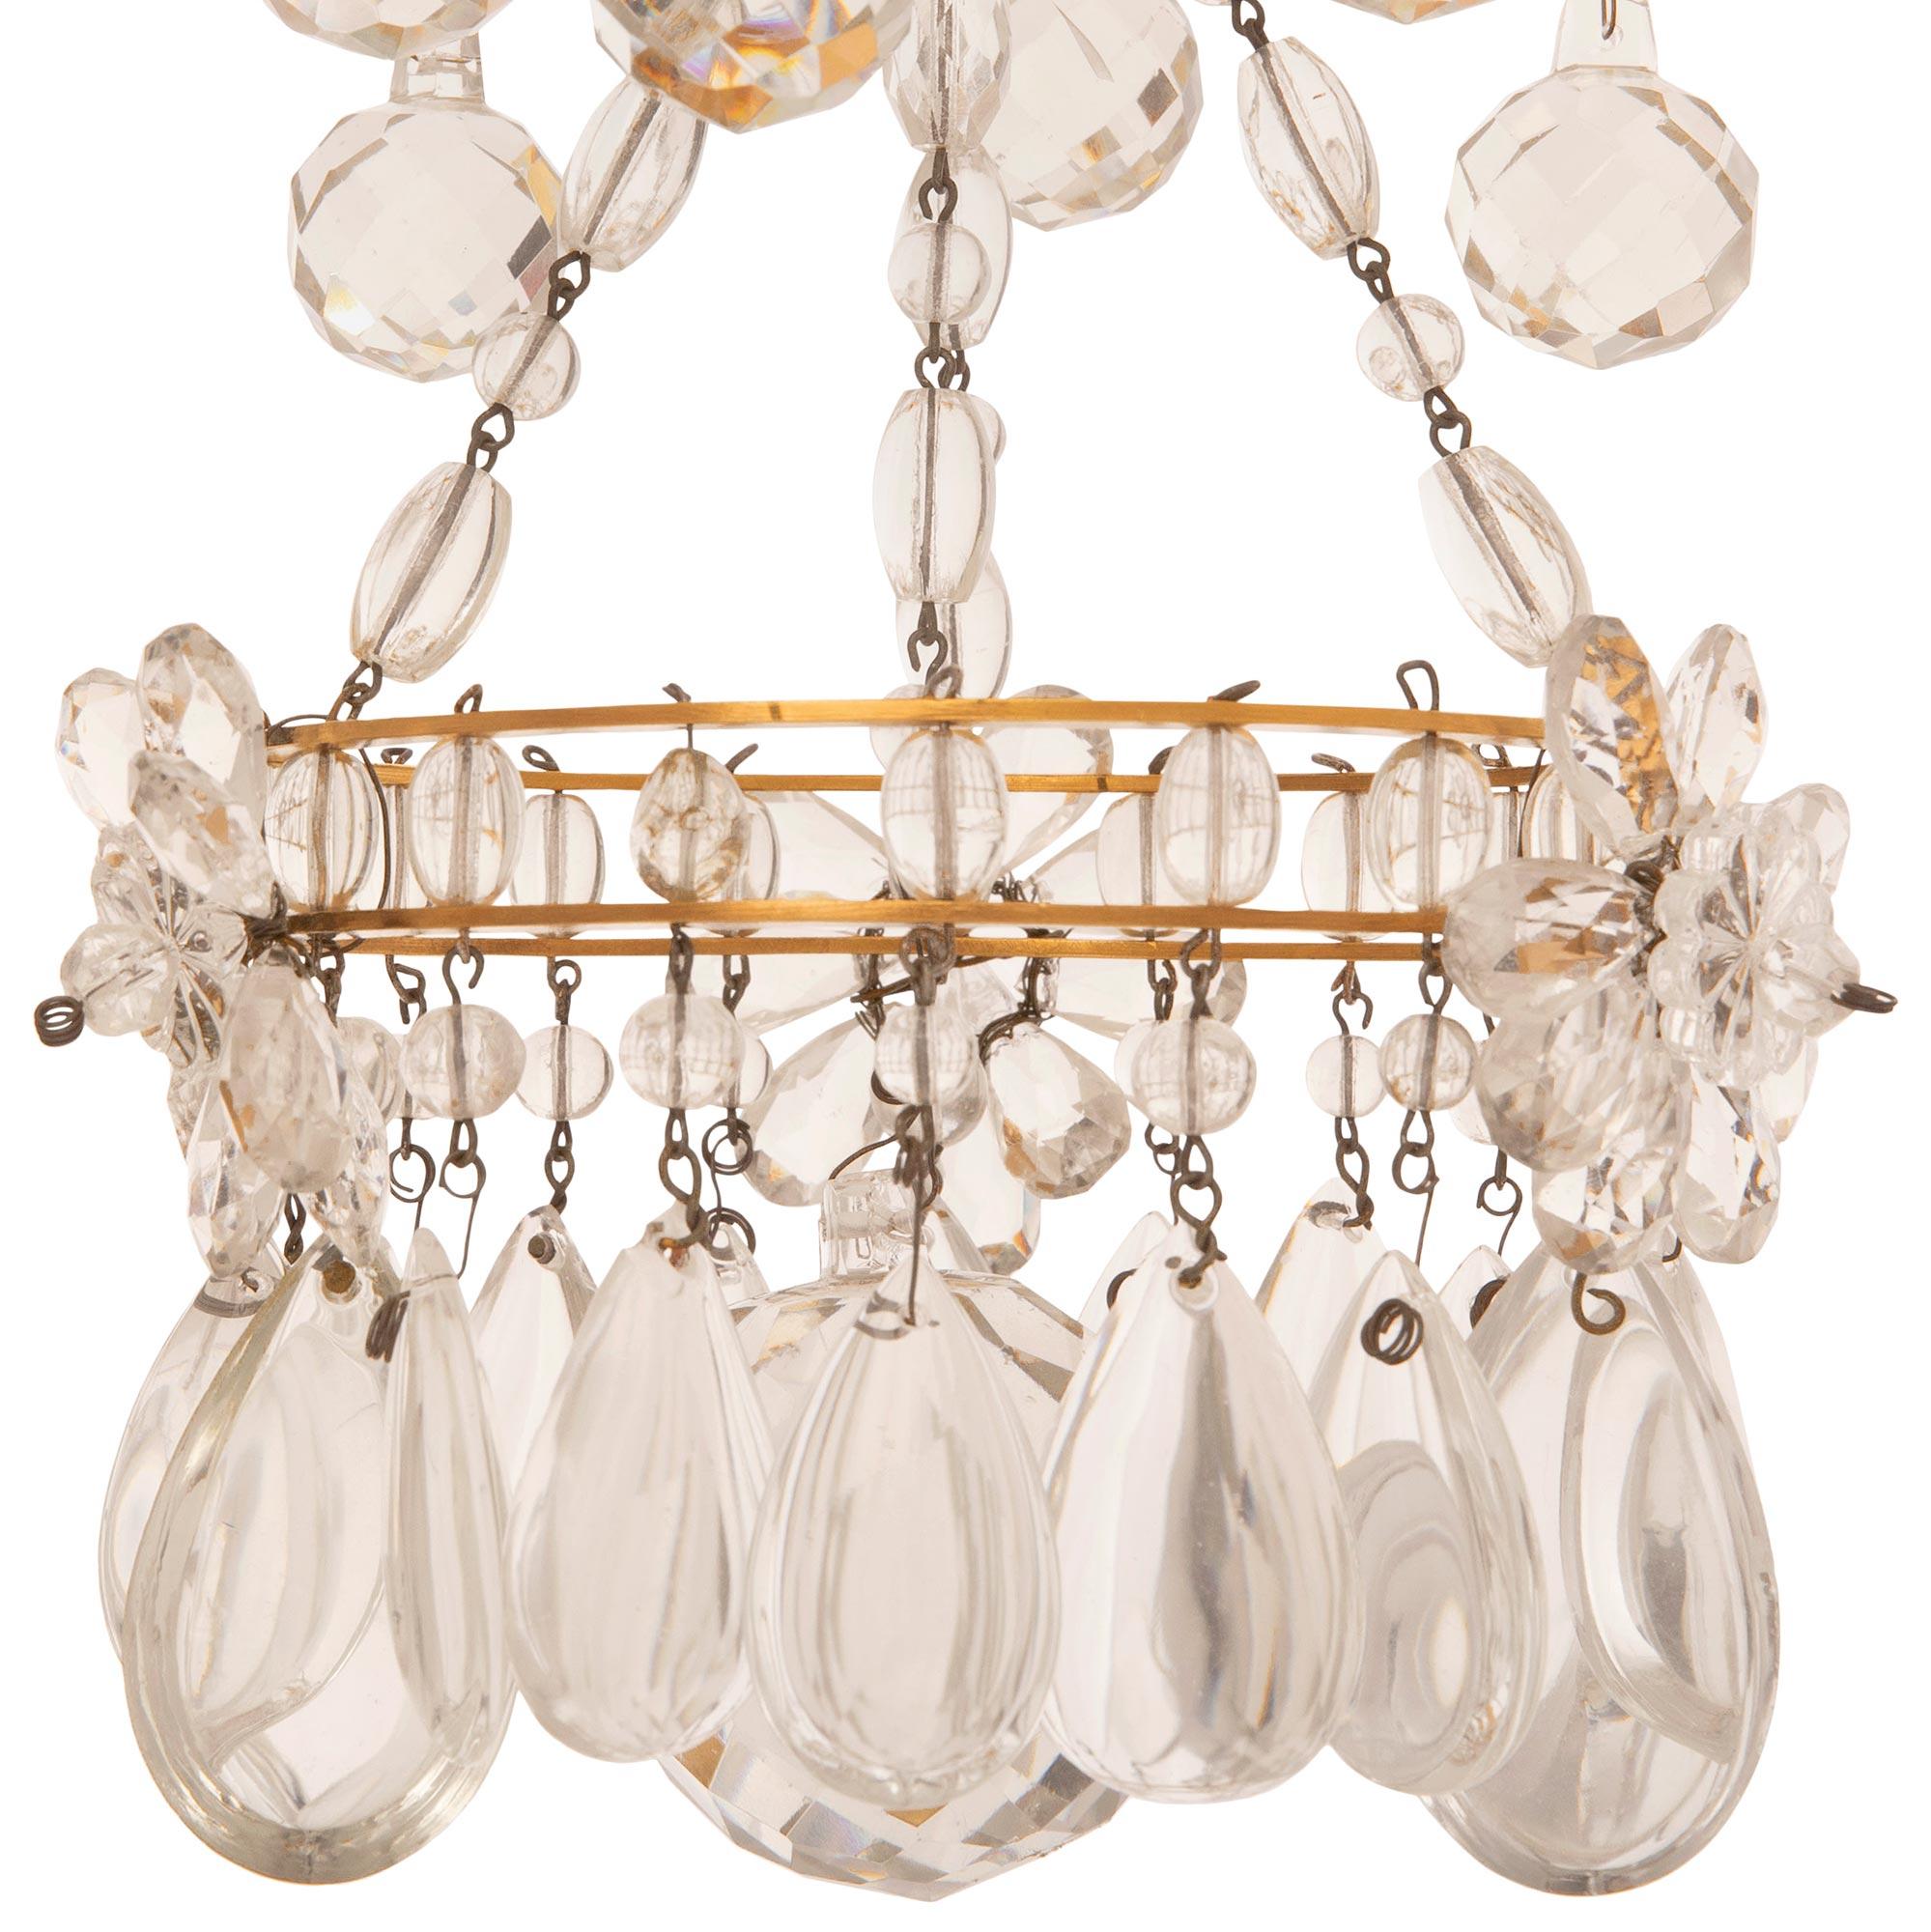 French 19th Century Louis XVI St. Ormolu & Baccarat Marie Antoinette Chandelier For Sale 4